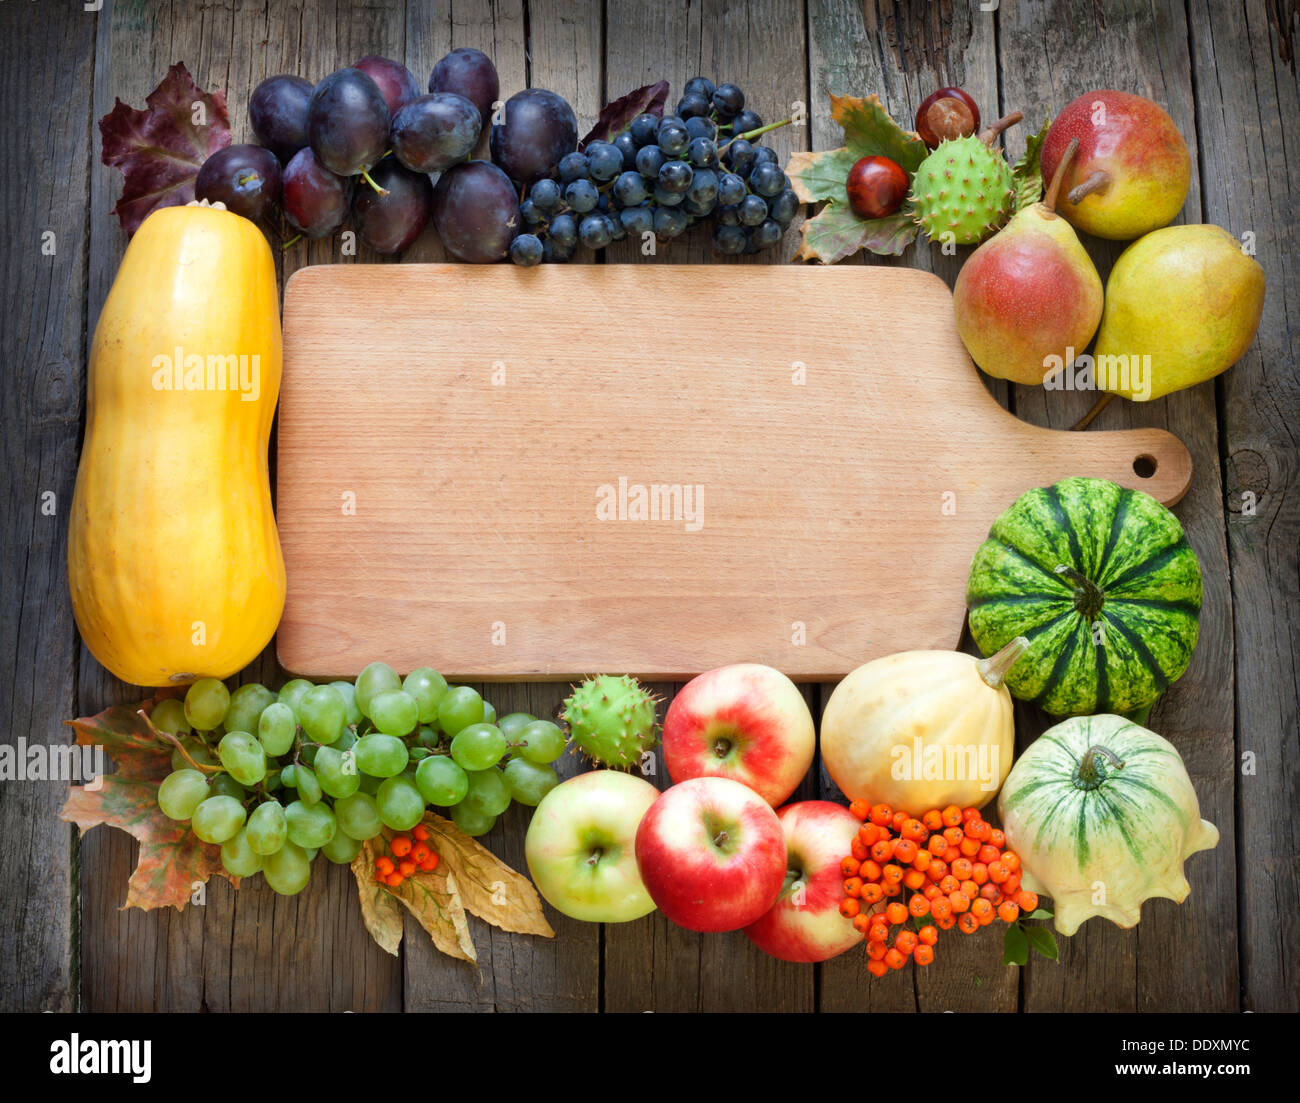 Autumn fruits and vegetables and empty cutting board background Stock Photo